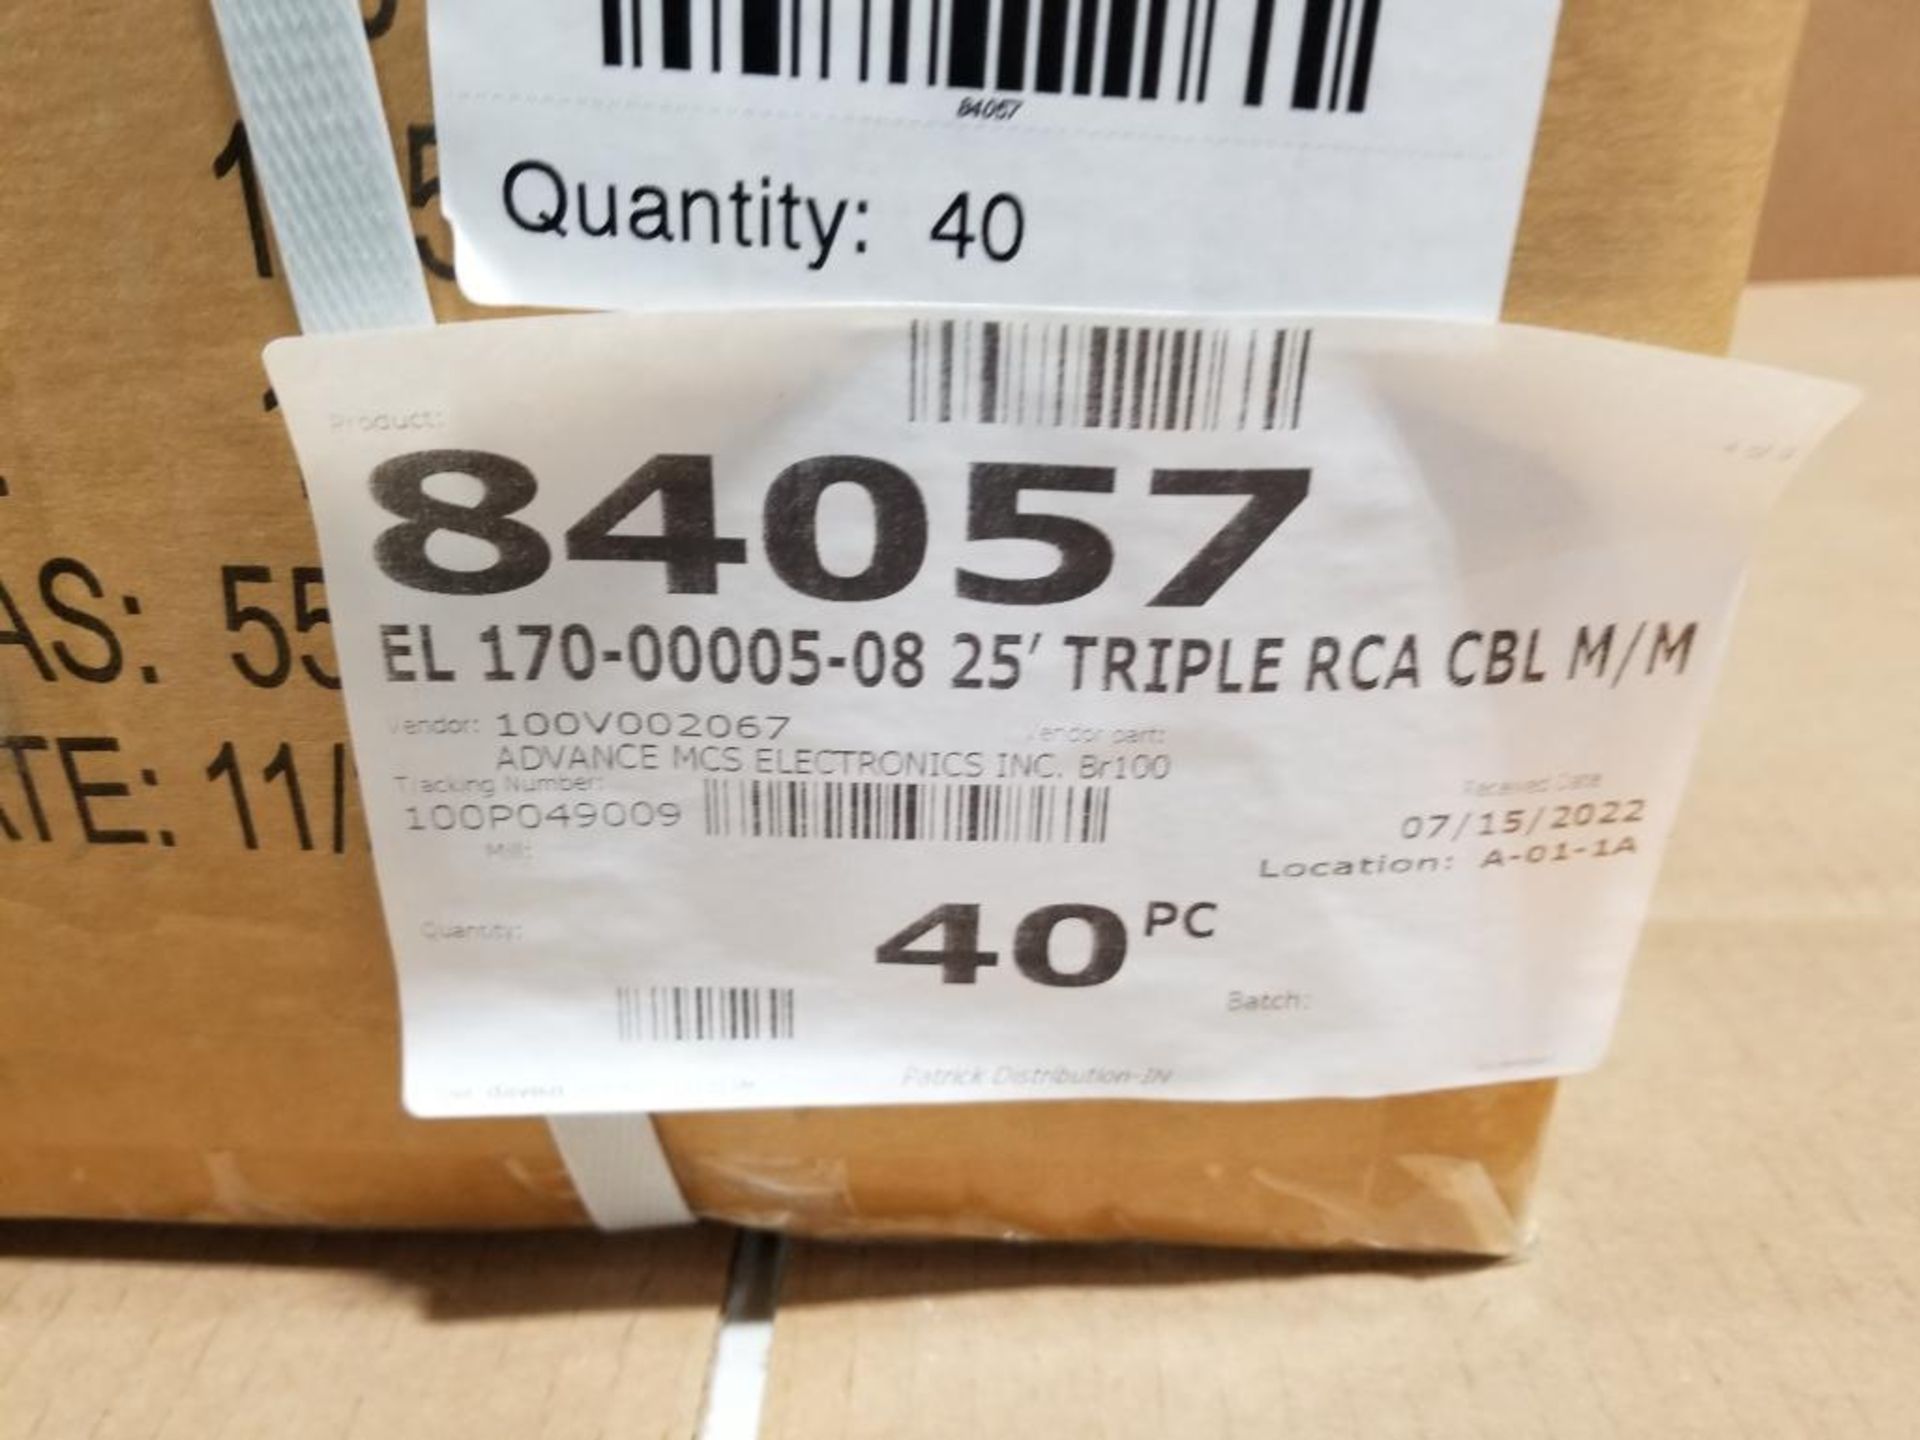 Qty 80 - Triple RCA wire. 25ft. Part number 170-00005-08. - Image 2 of 3